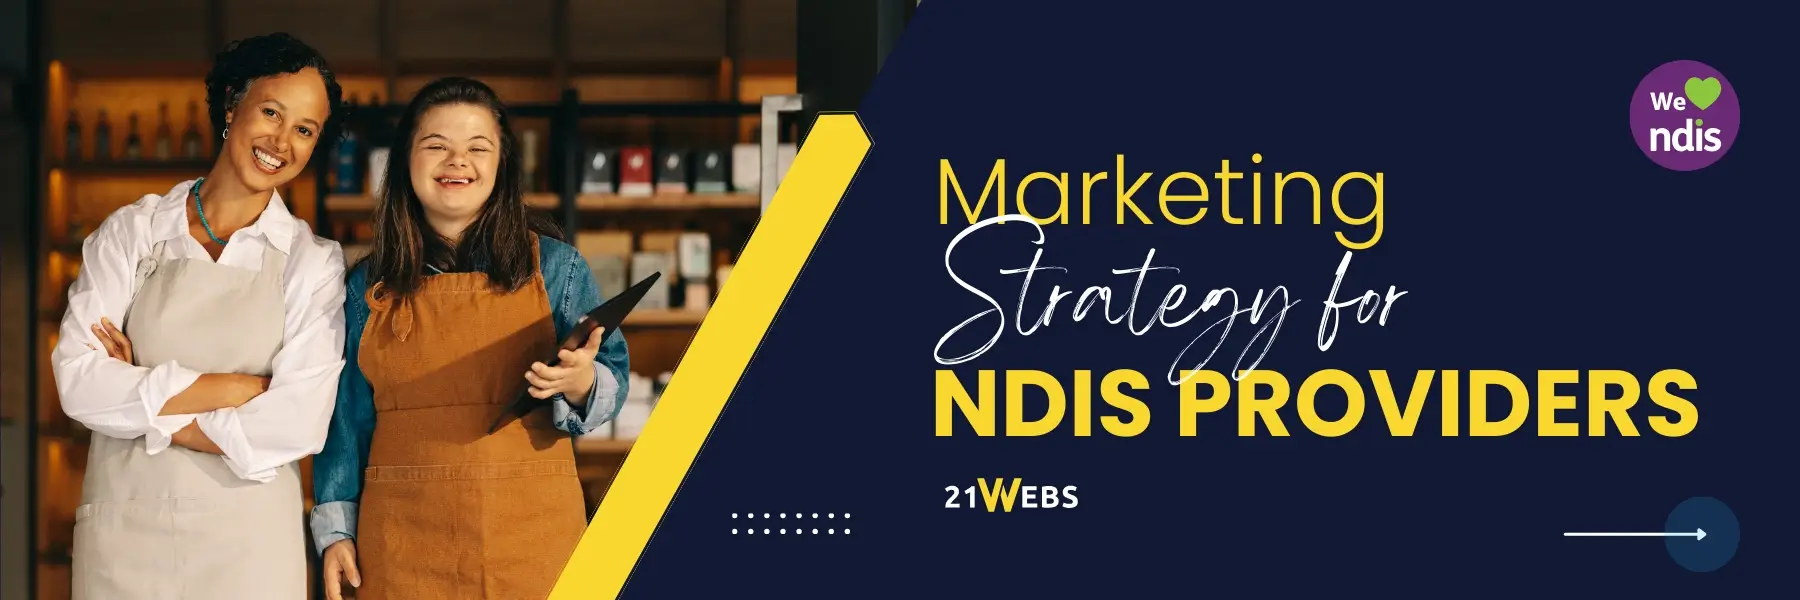 6 proven strategies for marketing your NDIS business.